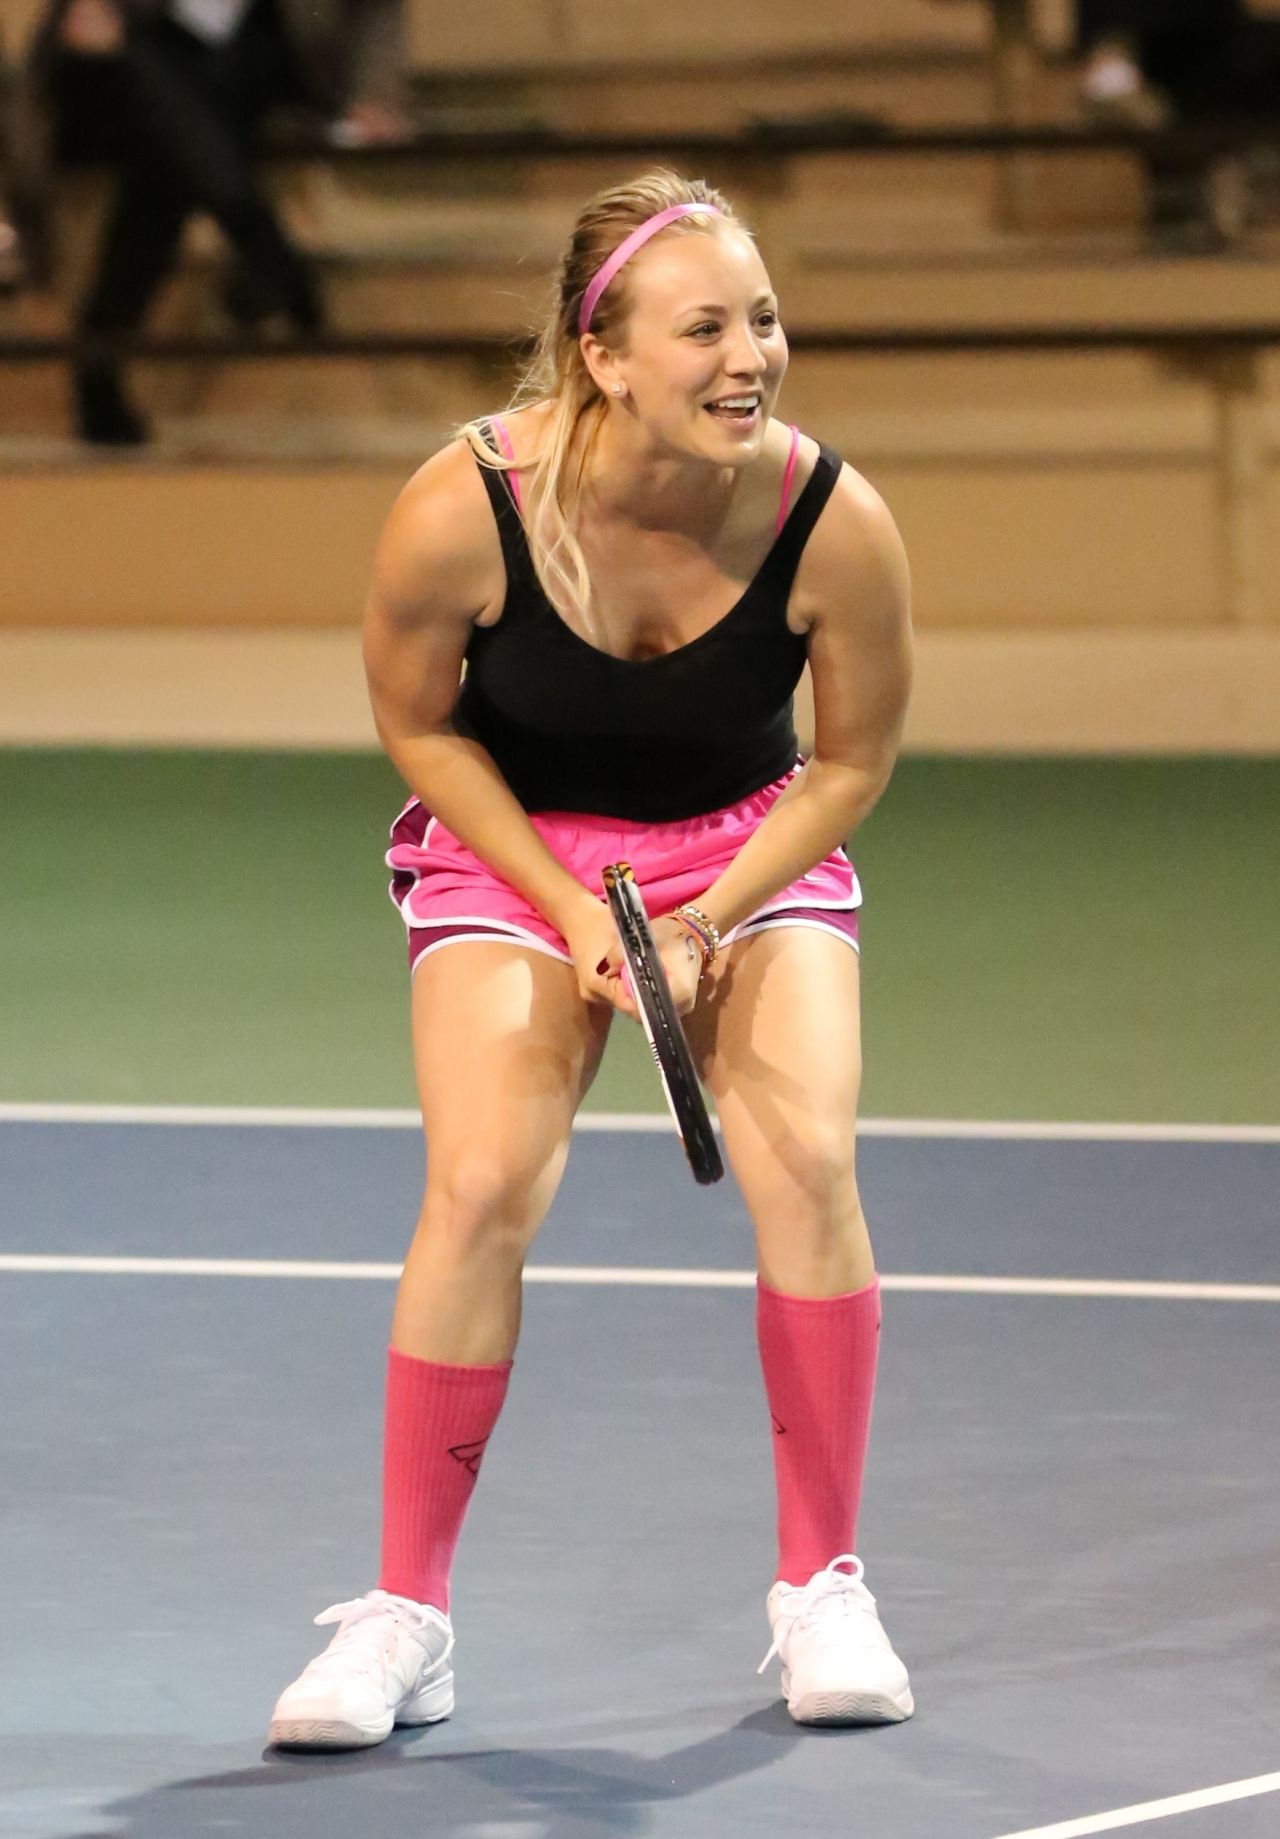 kaley-cuoco-tennis-match-for-charity-in-calabasa-march-2014_20.